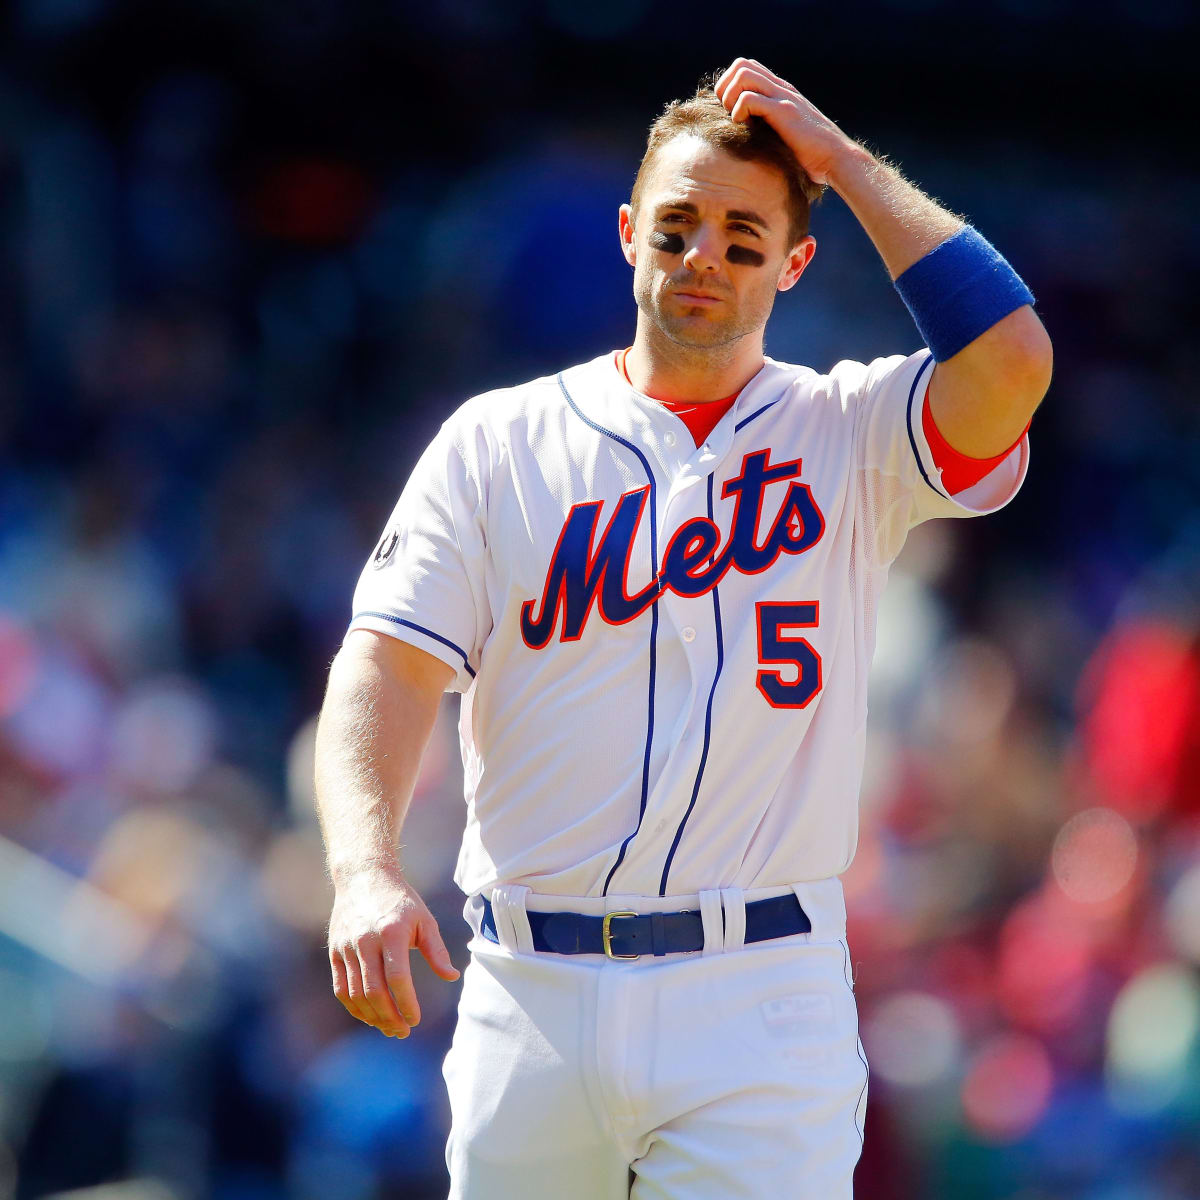 New York Mets Player David Wright Announced He's Retiring Due to